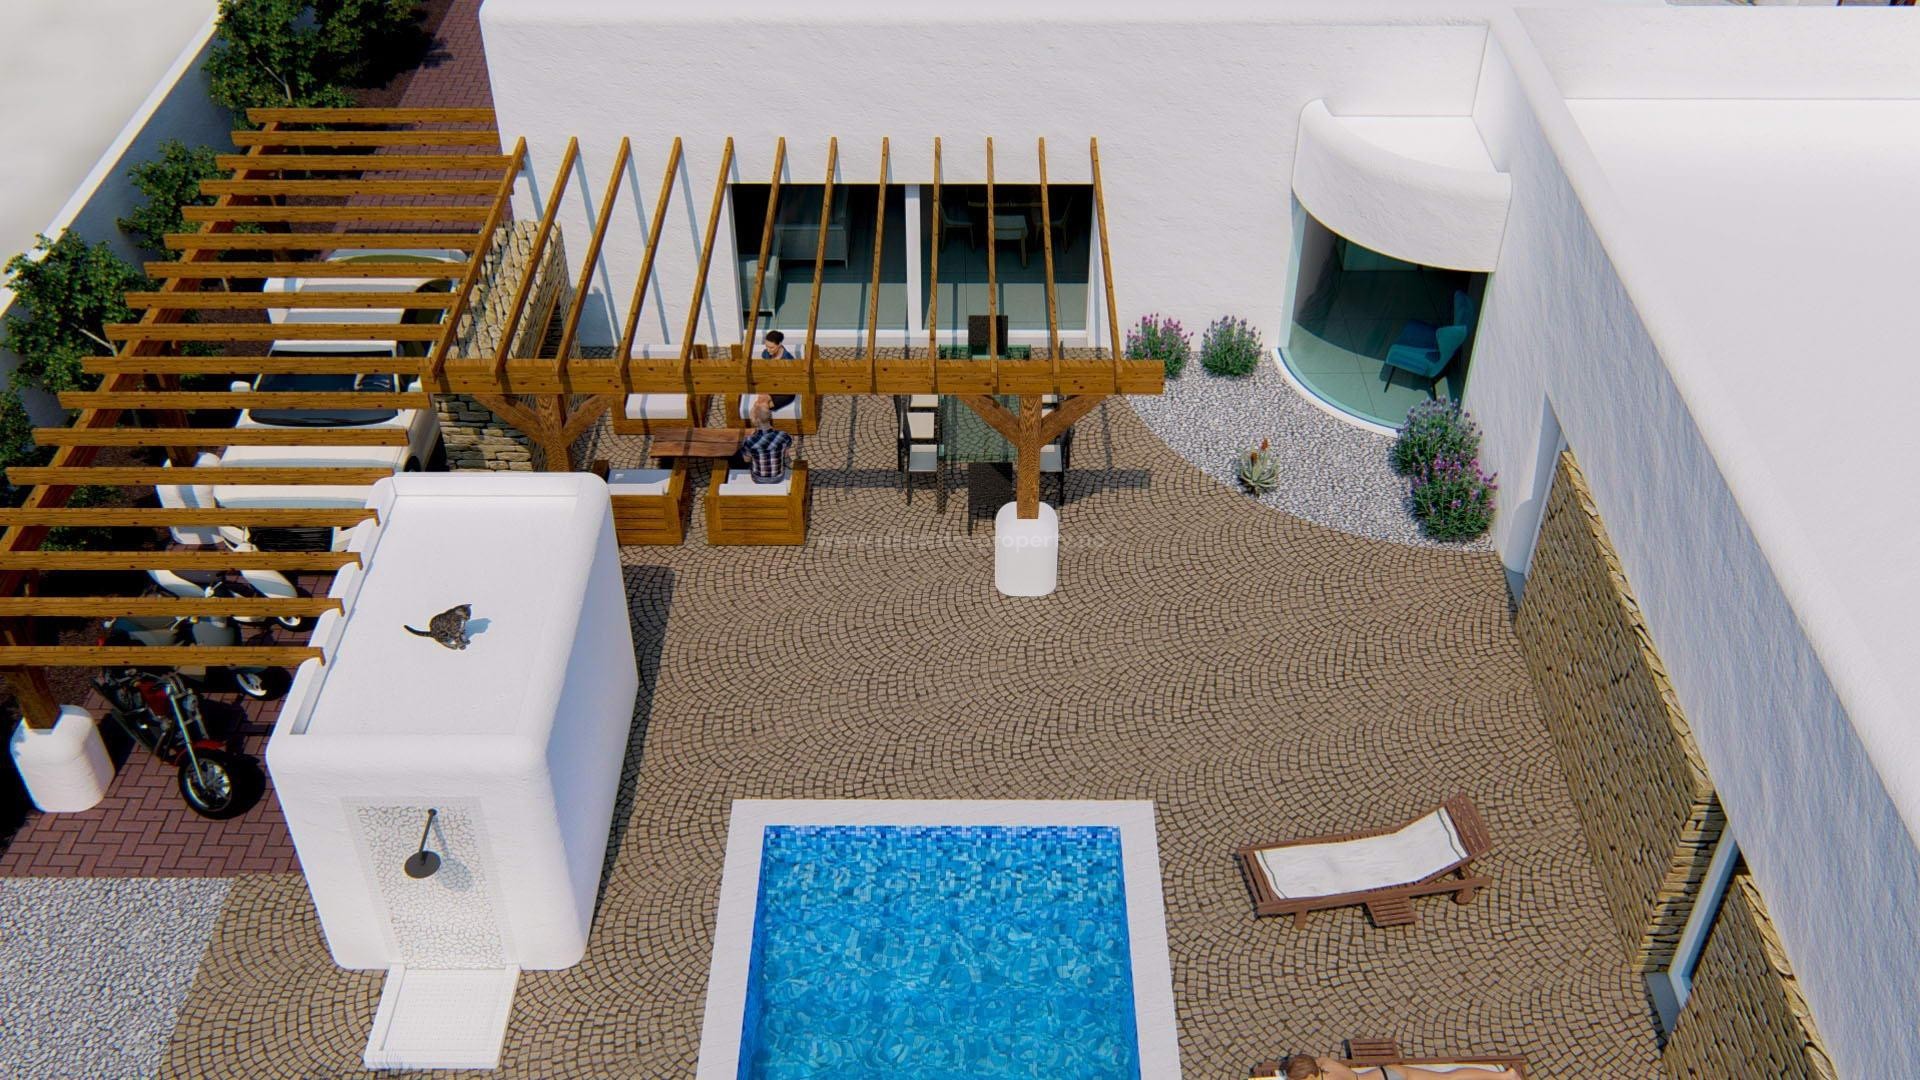 Exclusive house/villa in Ibiza style in Alfaz del Pi, 4 bedrooms, 2 bathrooms, large terrace with pool area facing south.